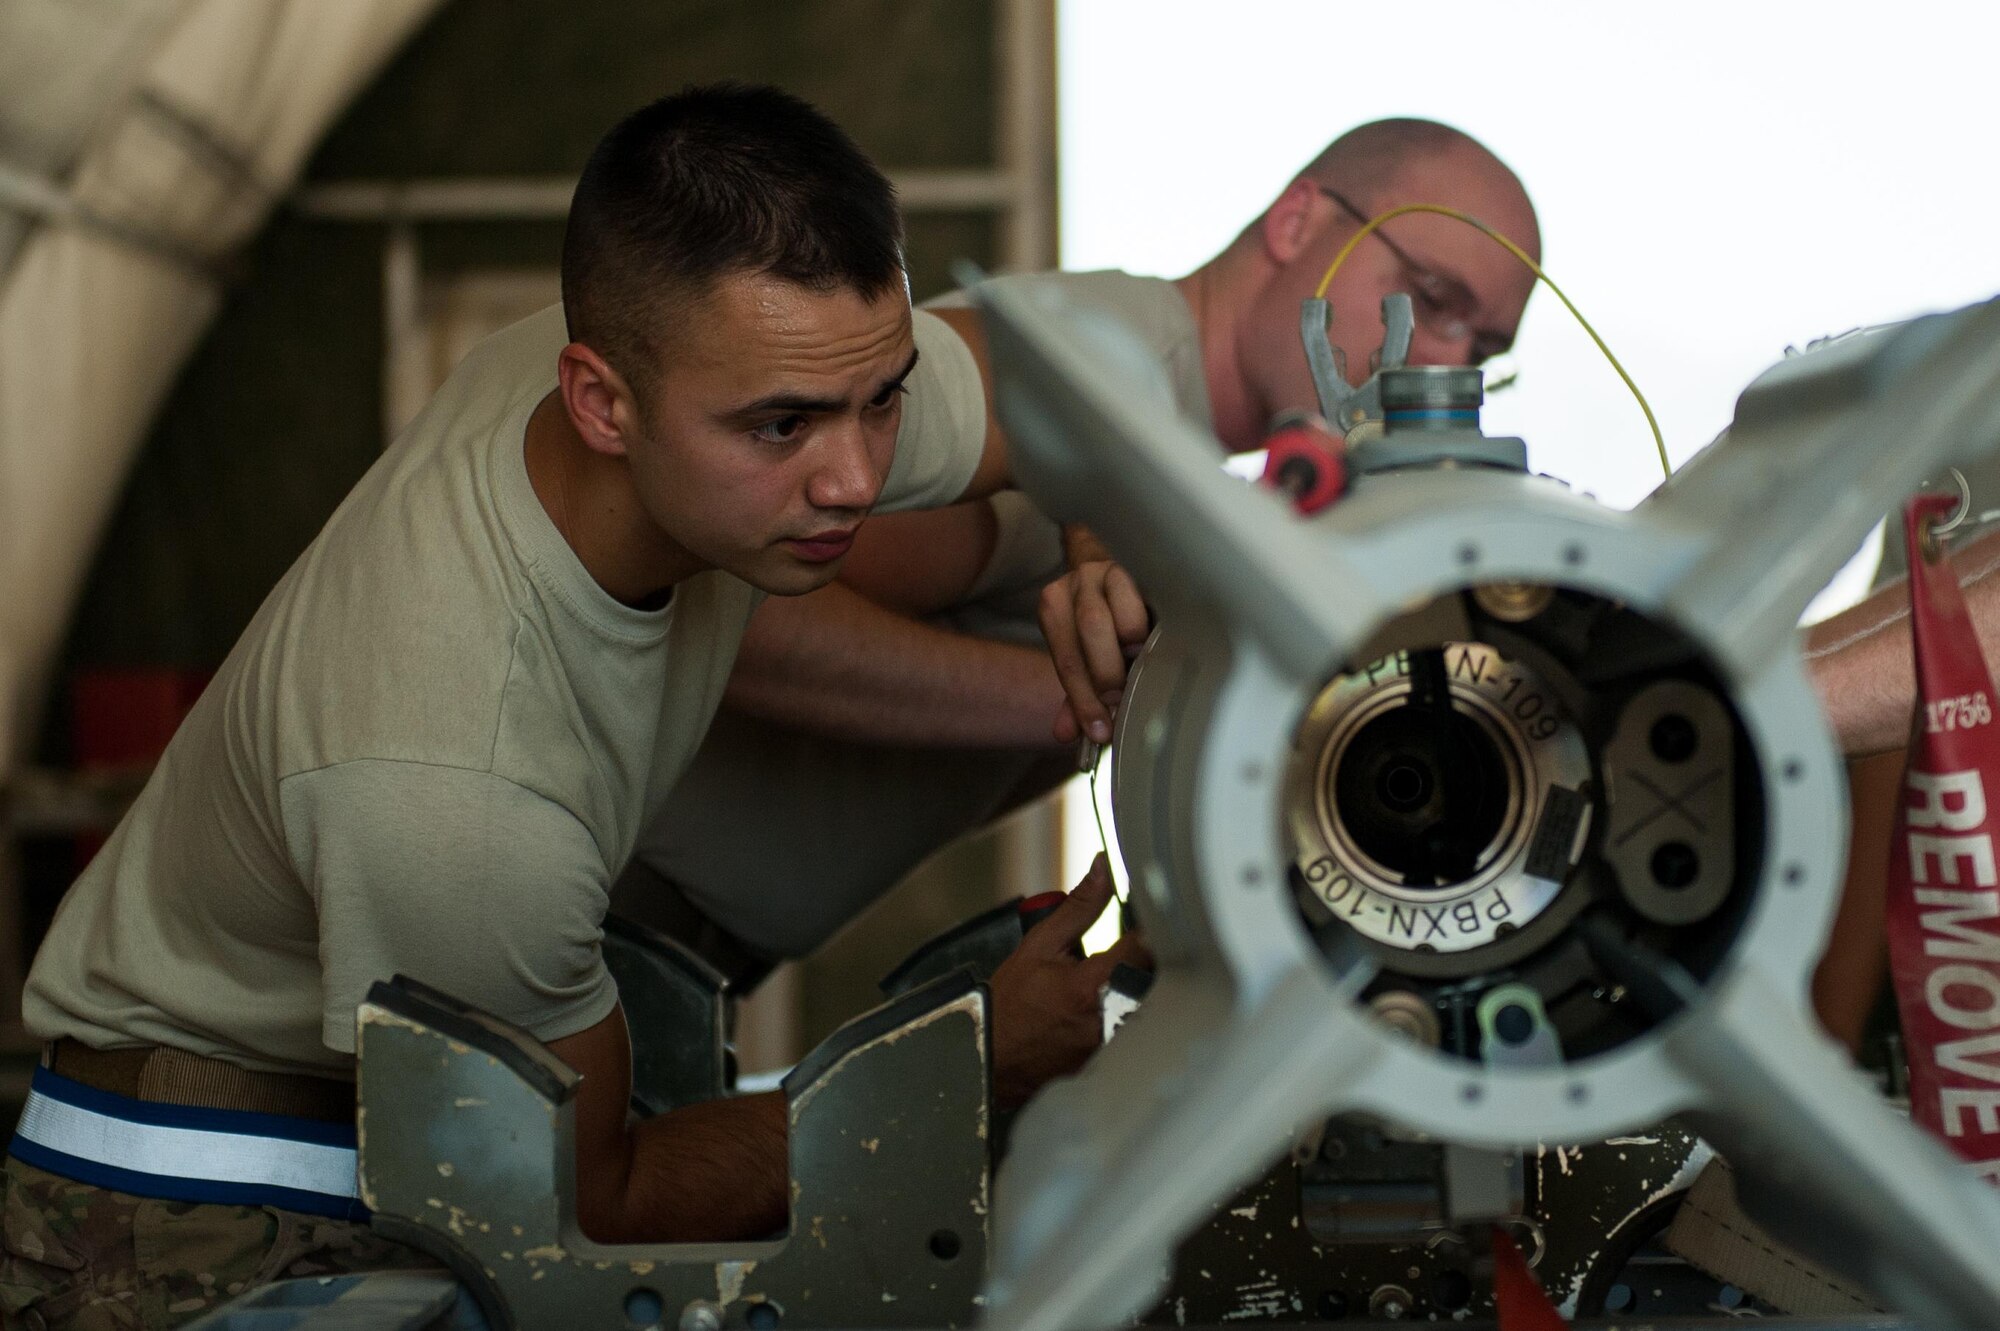 U.S. Air Force Airman 1st Class Matthew Lopez, 62nd Expeditionary Reconnaissance Squadron munitions systems technician, builds a GPS-guided GBU-49 weapon at Kandahar Airfield, Afghanistan, Aug. 15, 2015.  The 62nd ERS Munitions Flight ensures that every munition loaded onto an MQ-1 Predator and MQ-9 Reaper will perform as expected when used. (U.S. Air Force photo by Tech. Sgt. Joseph Swafford/Released)